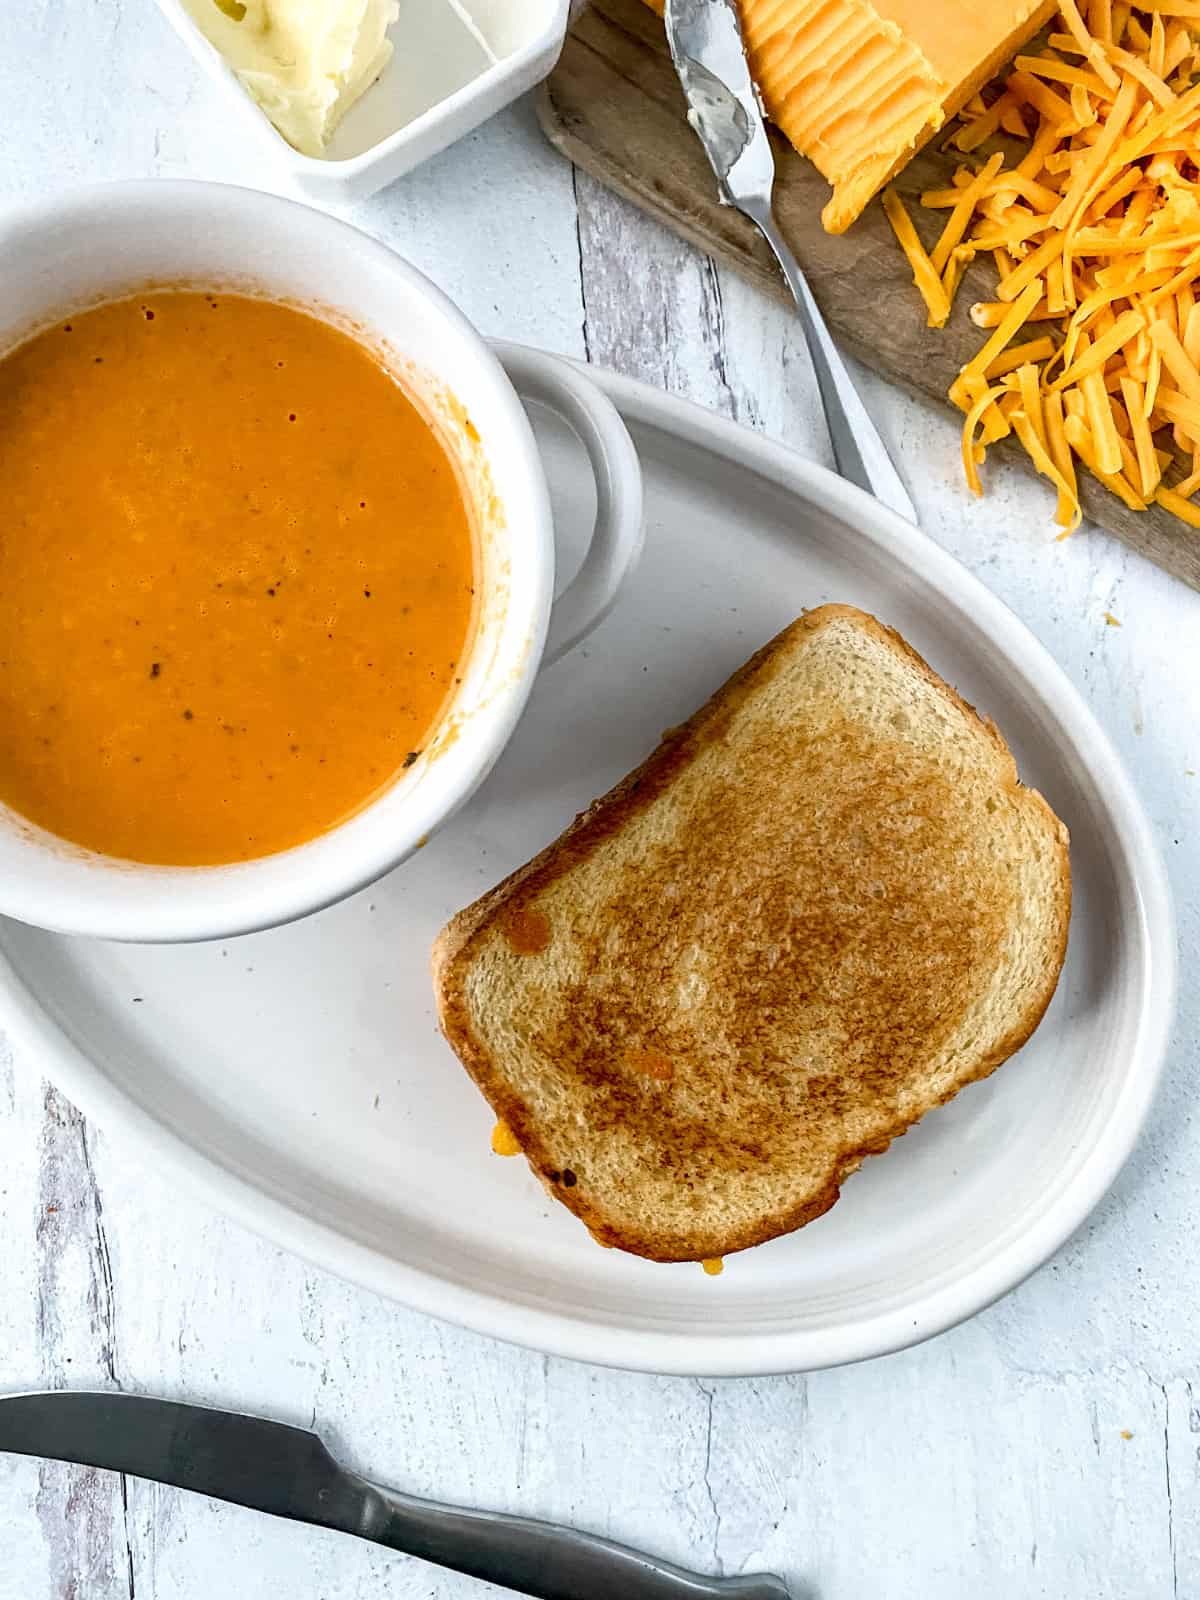 tomato basil soup and grilled cheese sandwich.